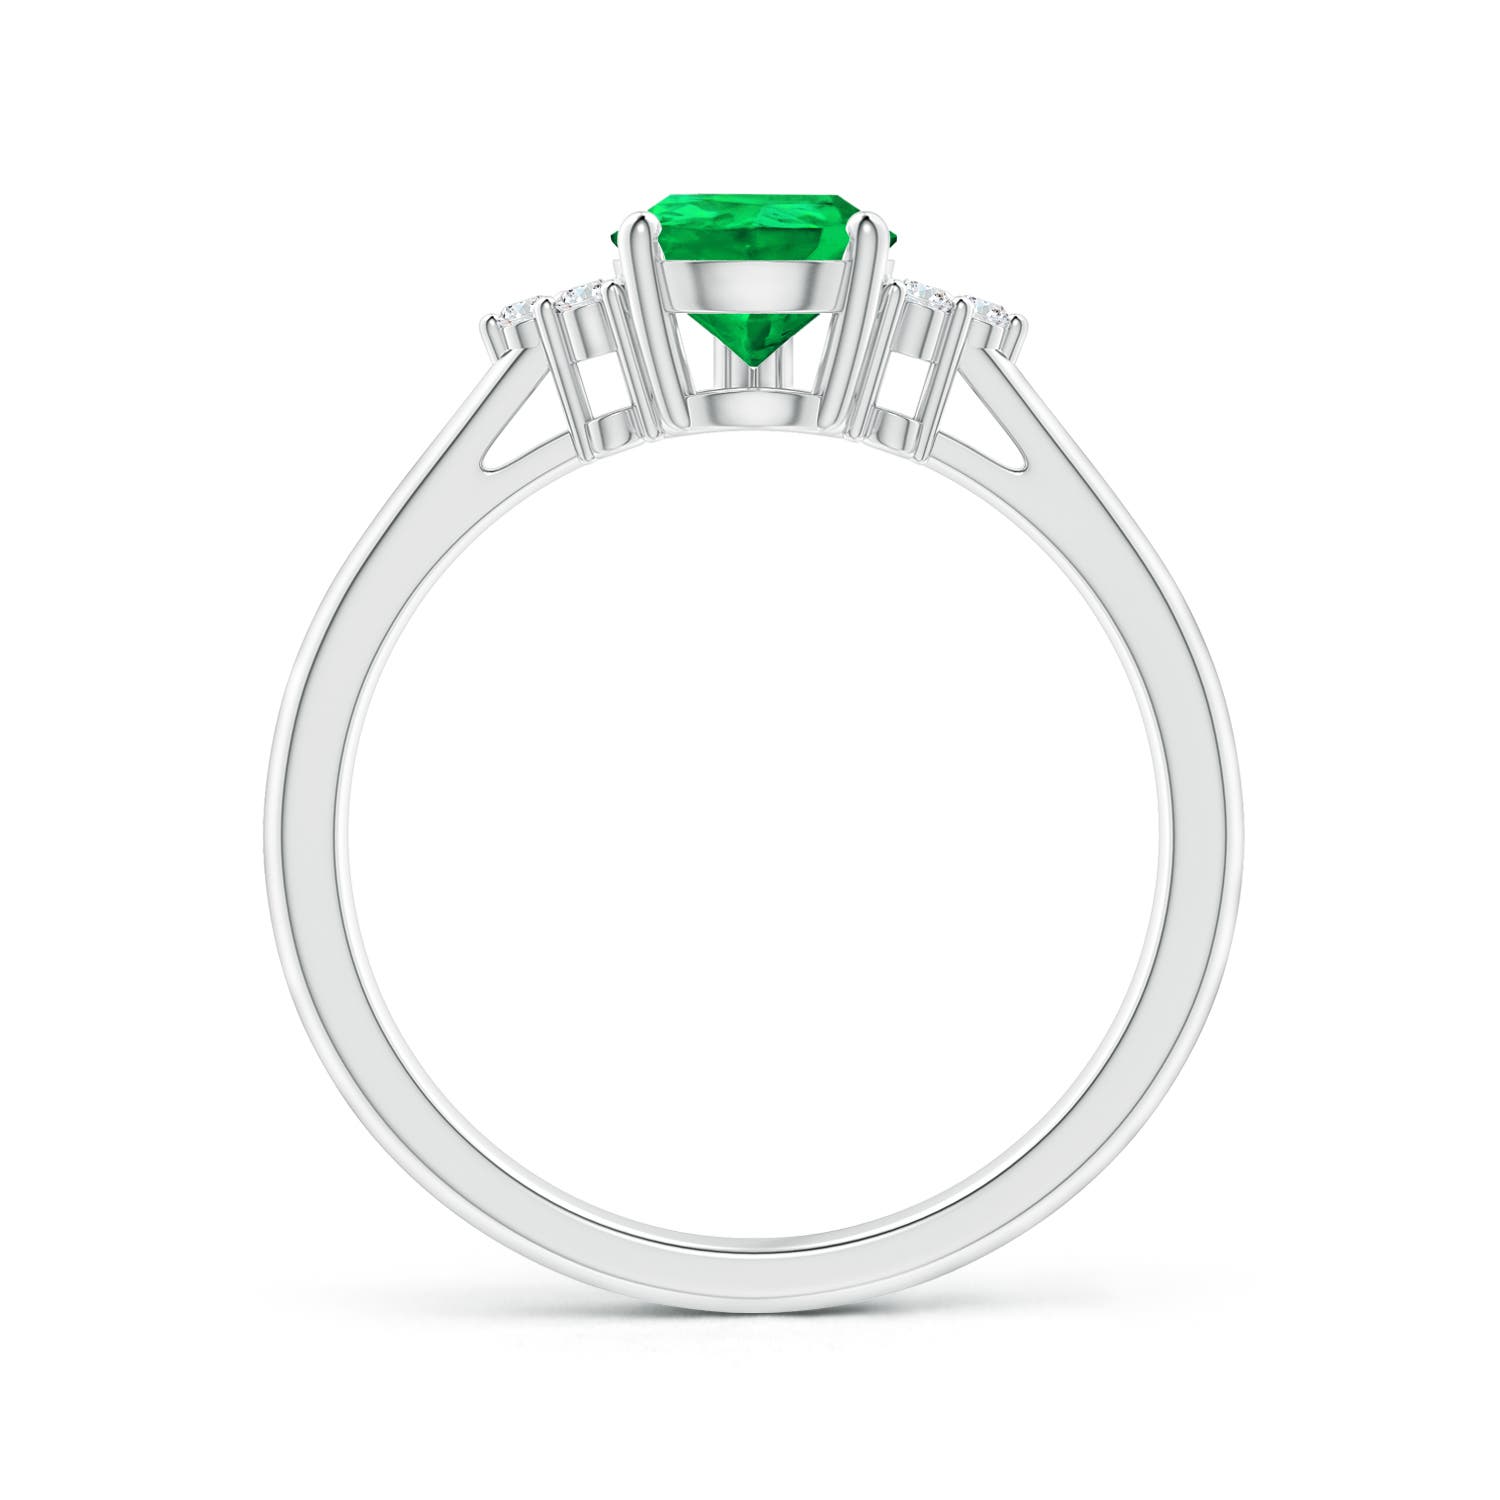 AAA - Emerald / 1.02 CT / 14 KT White Gold